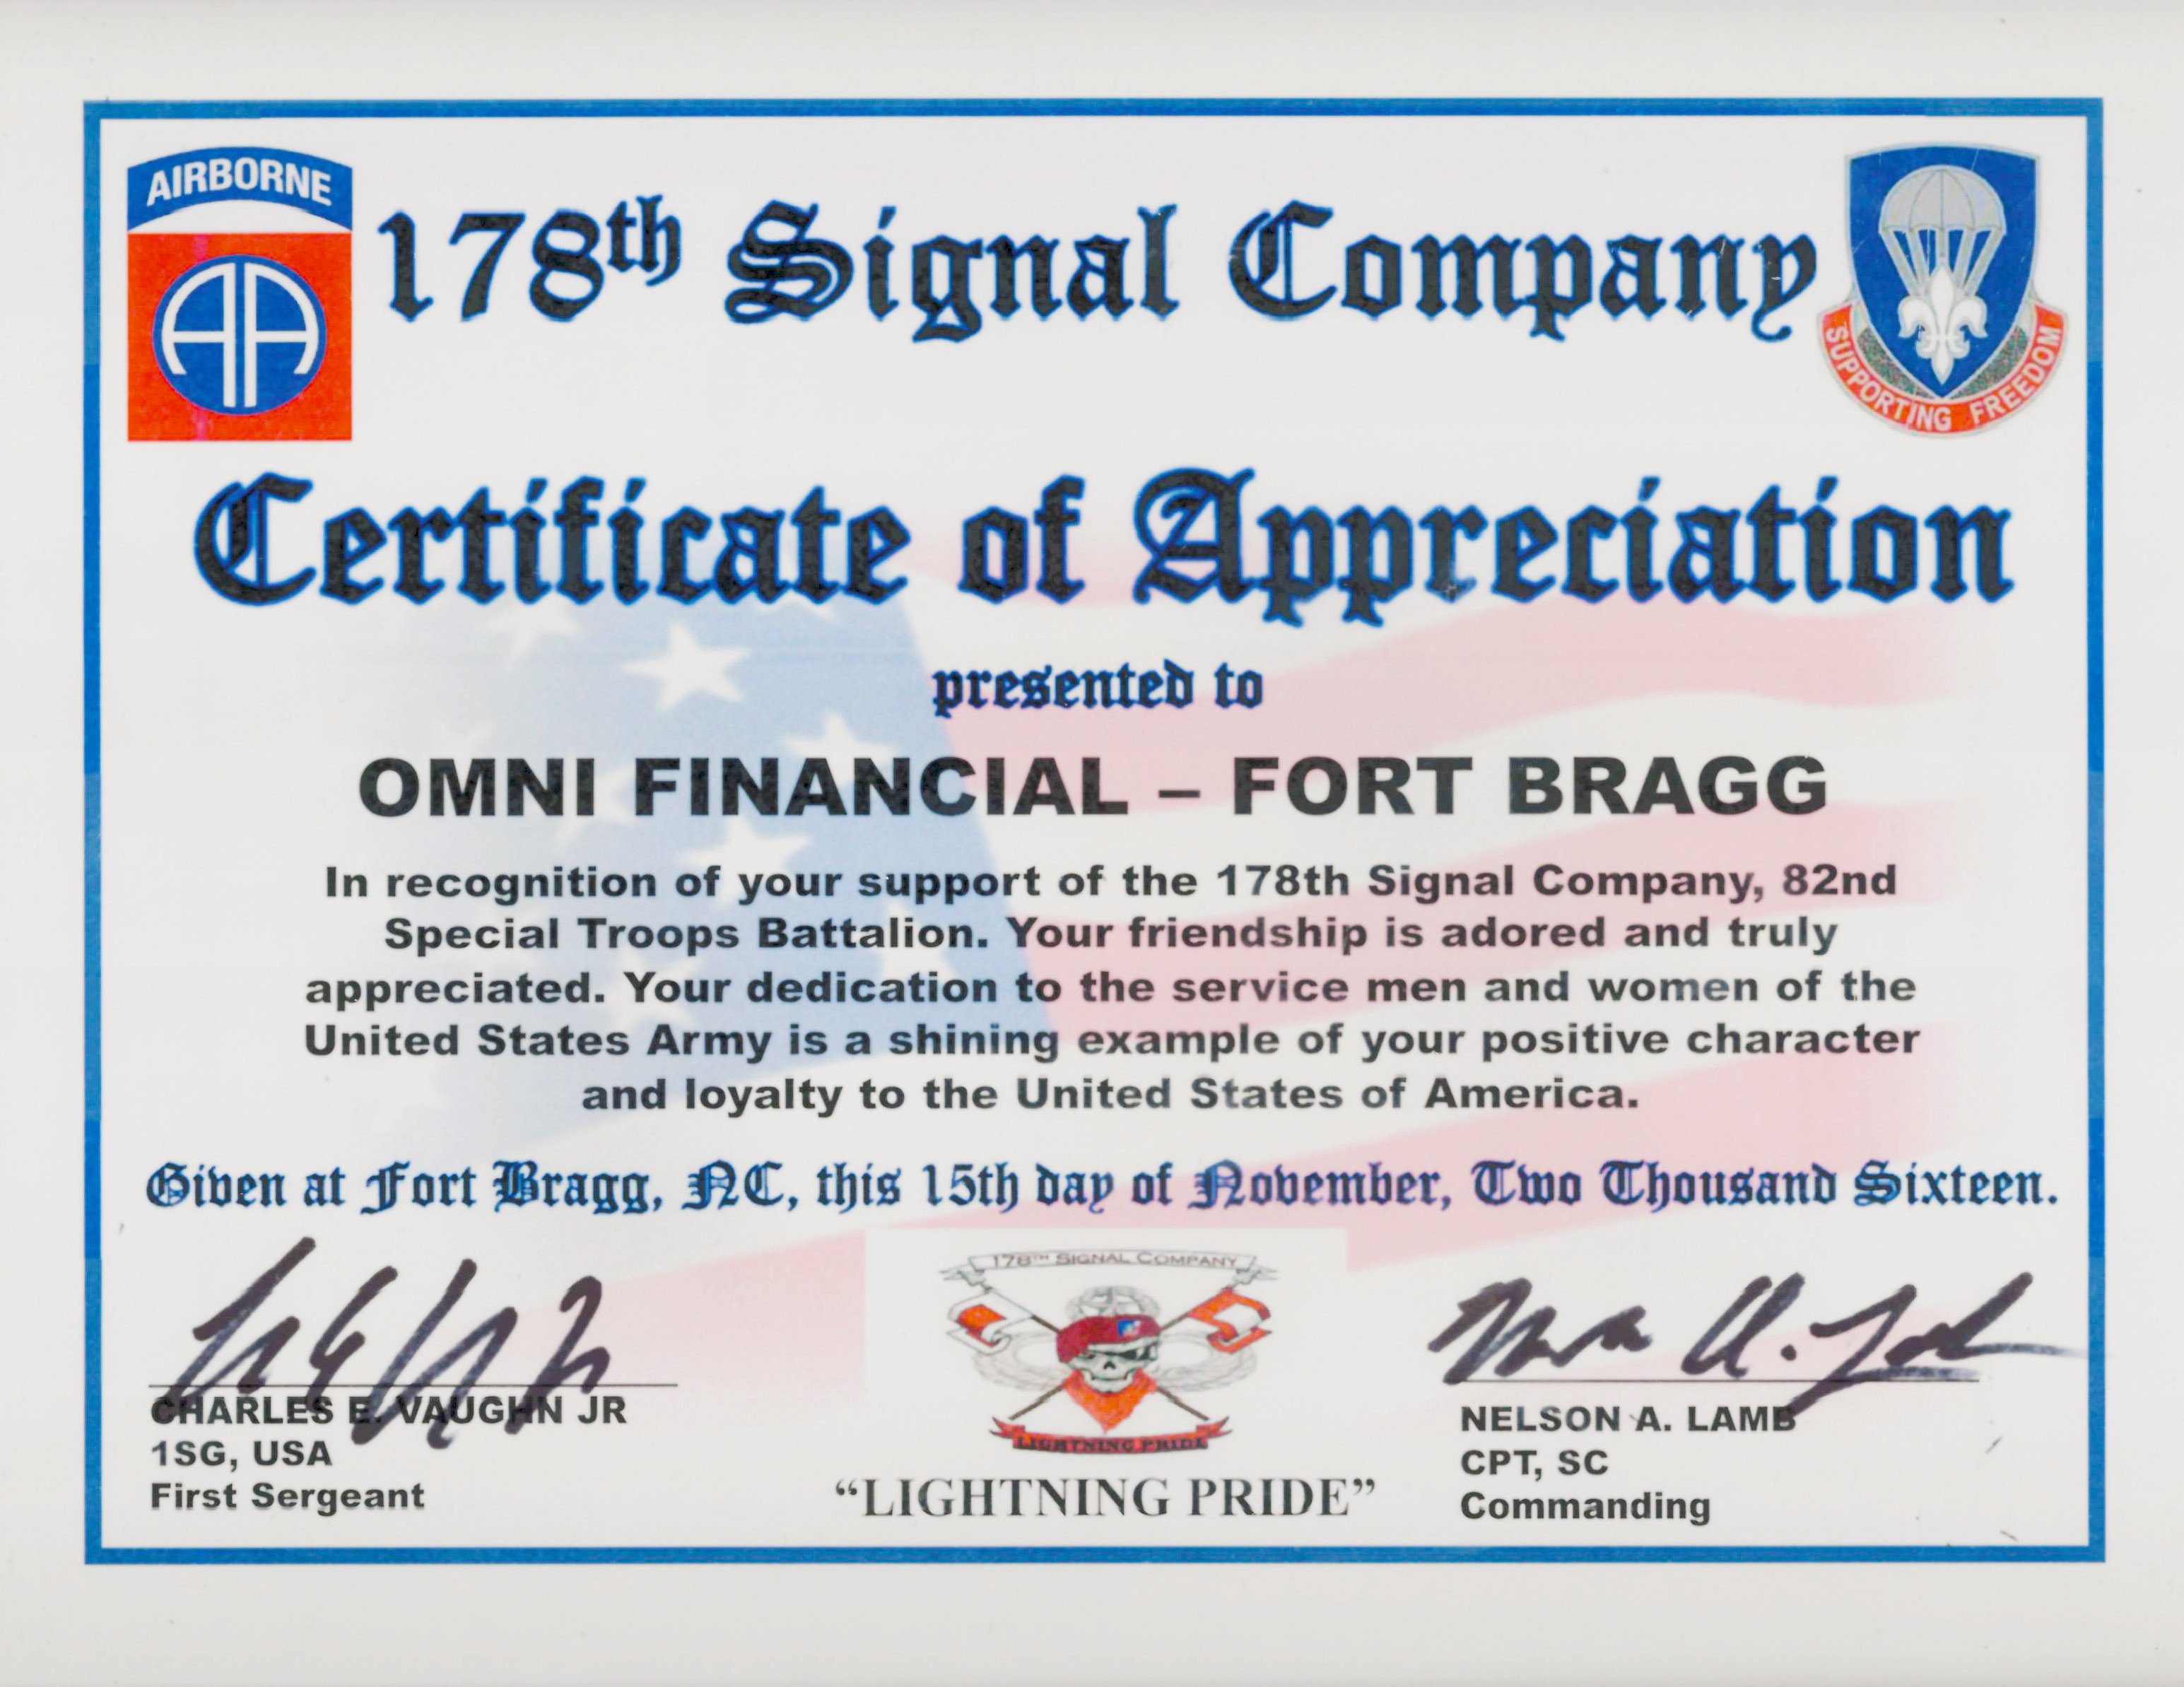 Omni Military Loans in Fayetteville NC